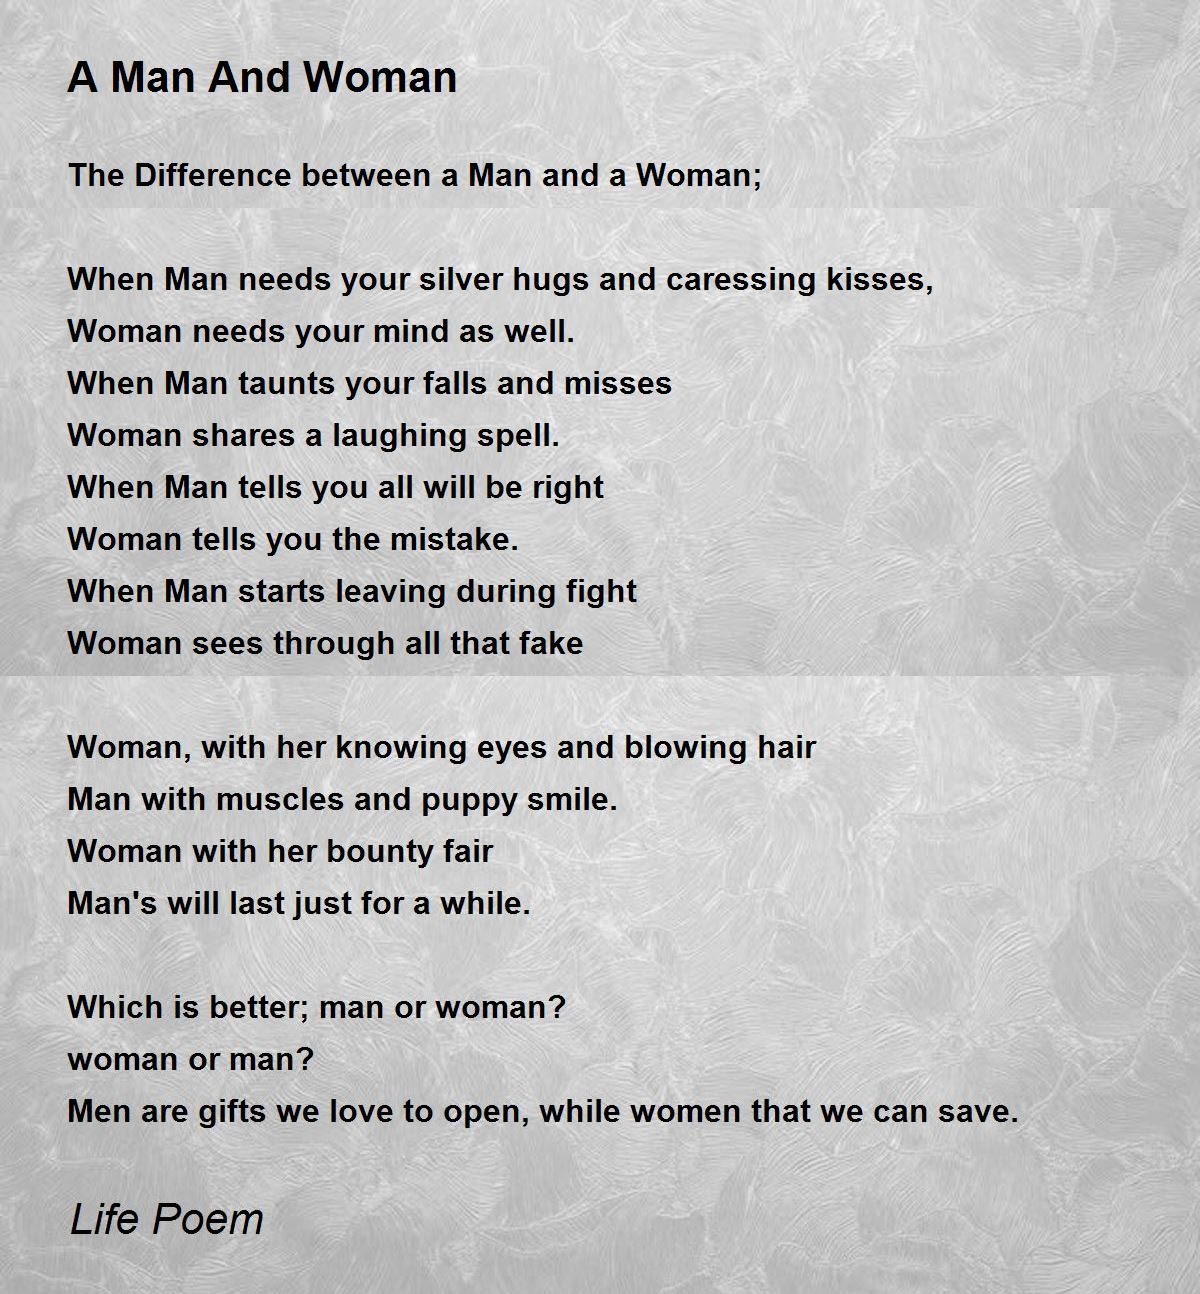 Poems about men and women